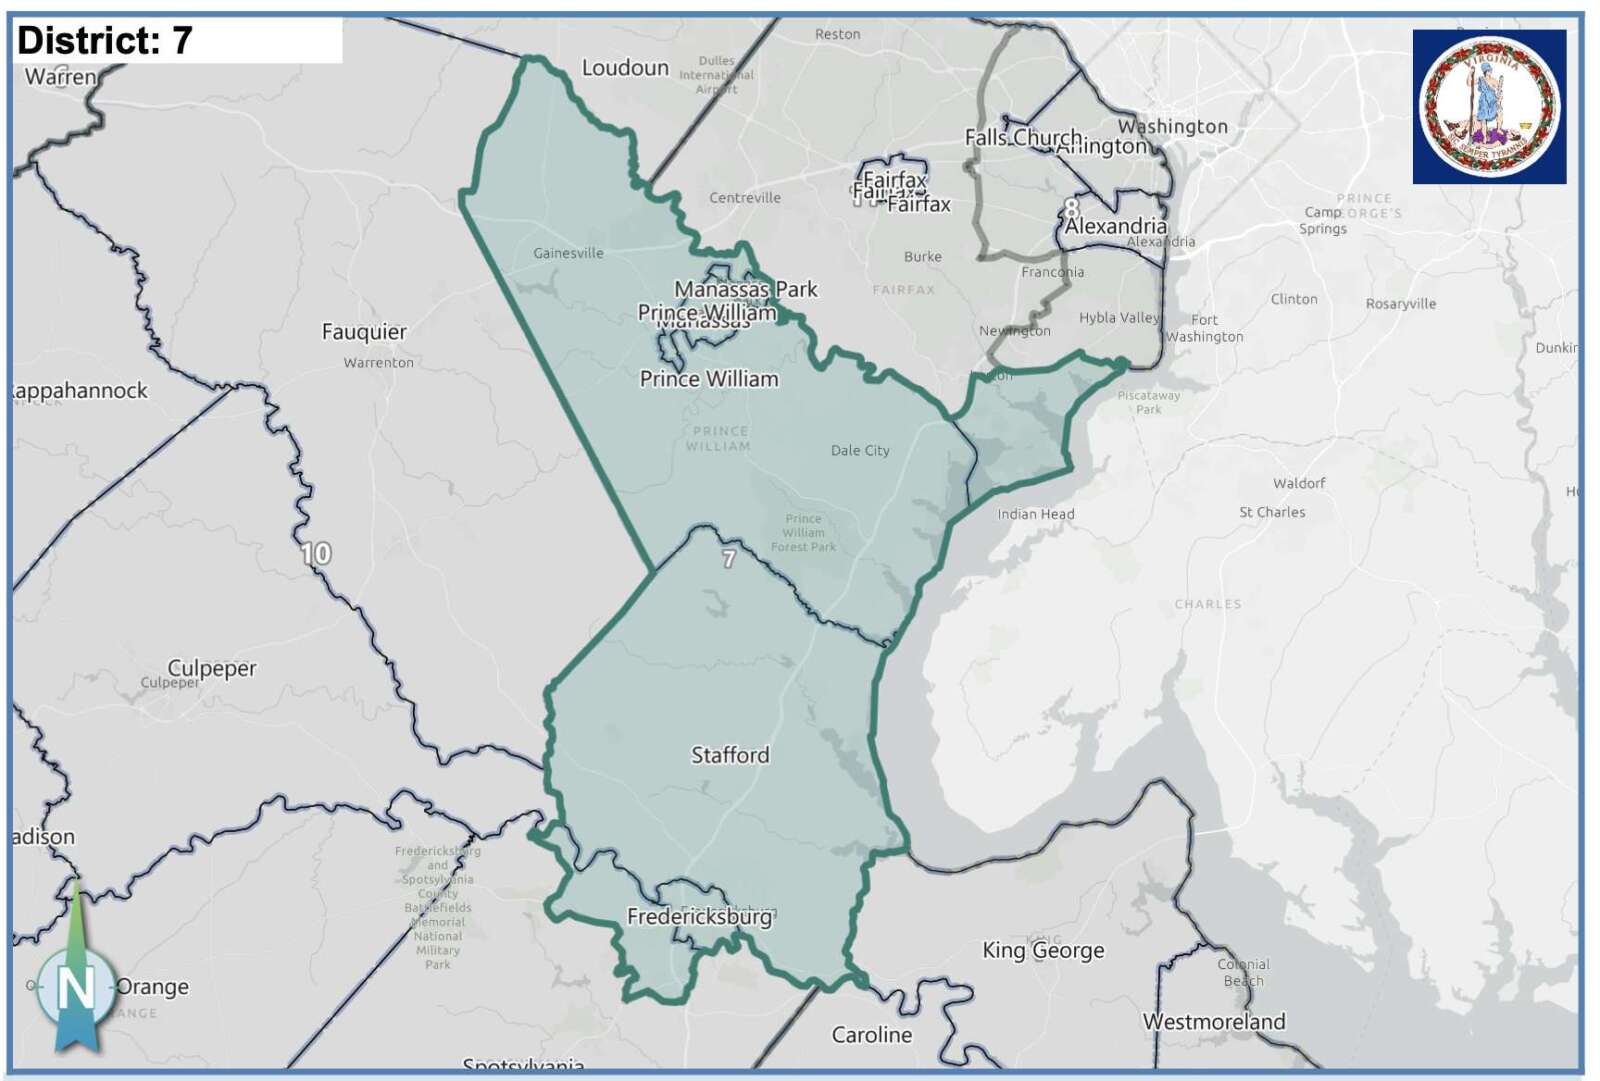 New Maps Move Incumbents Out Of Seats An Explainer Of An Expected Coming Political Shakeup 9467